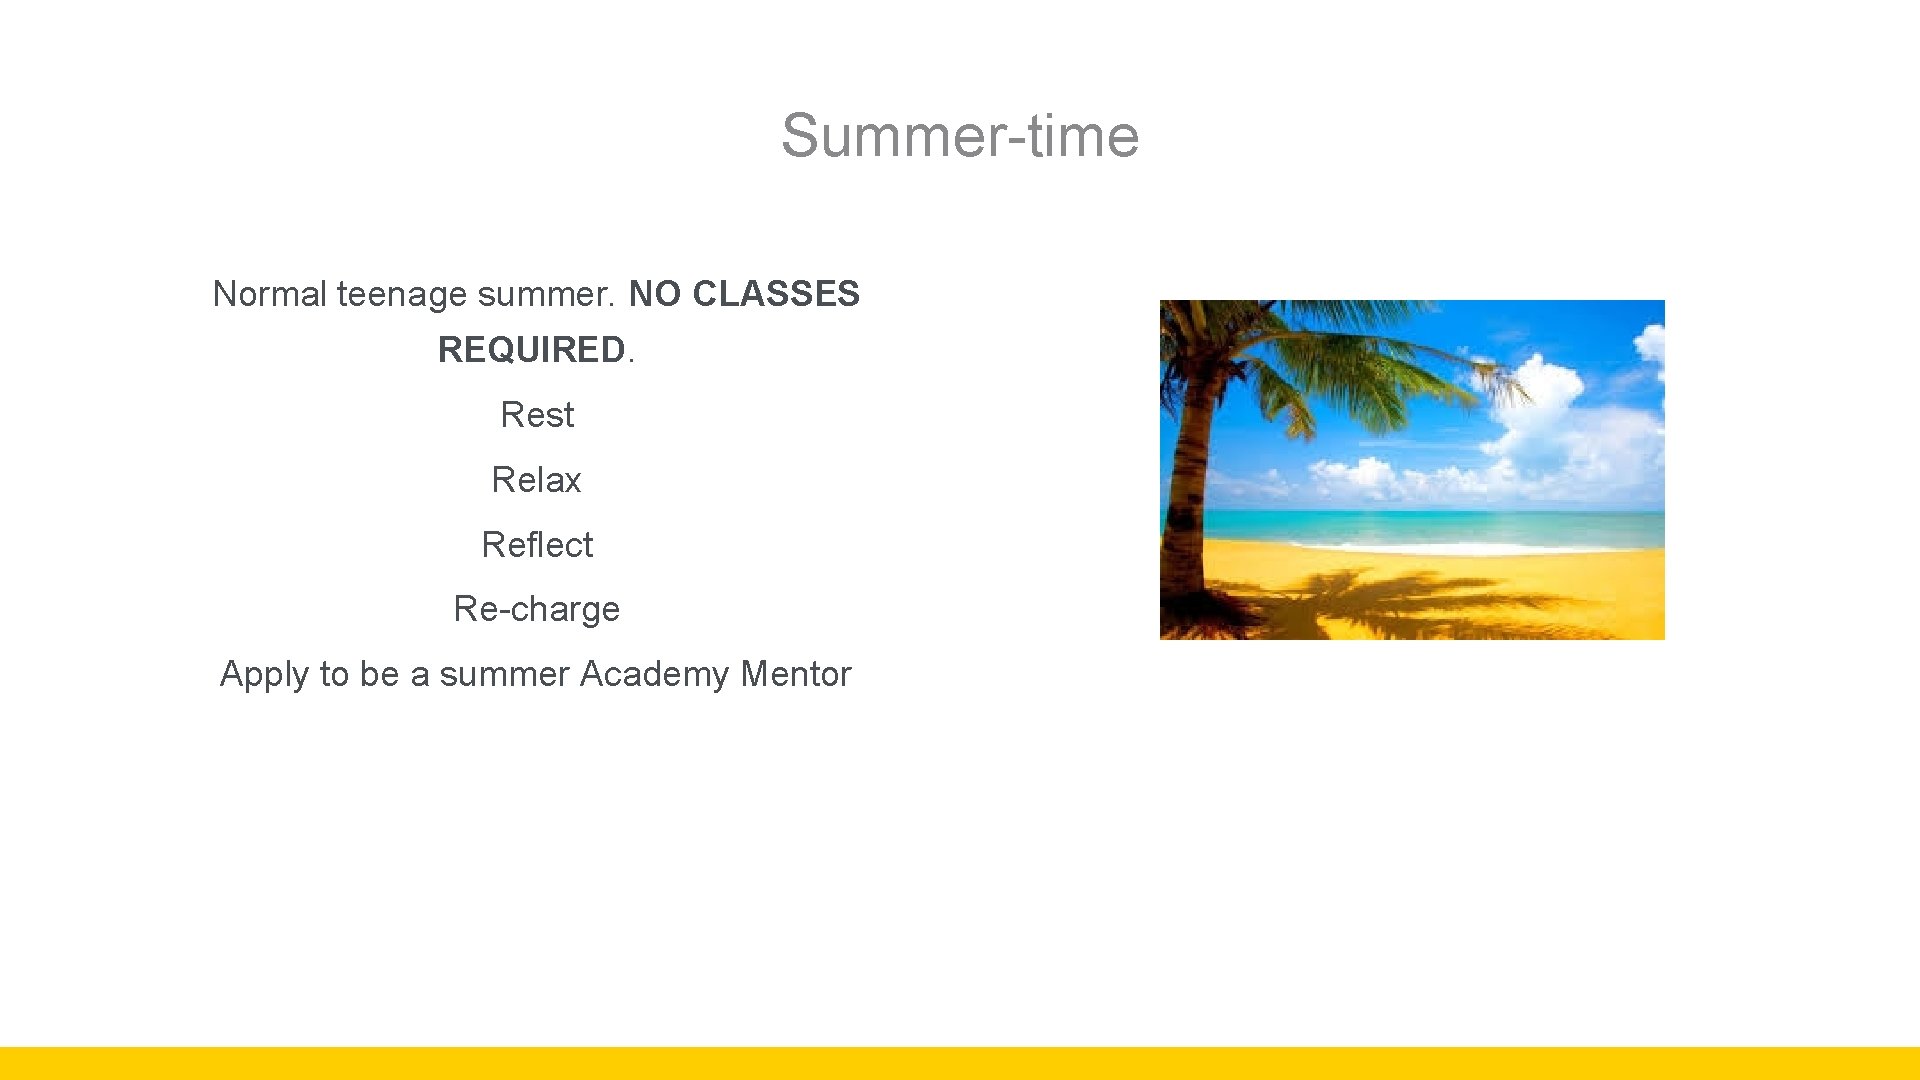 Summer-time Normal teenage summer. NO CLASSES REQUIRED. Rest Relax Reflect Re-charge Apply to be